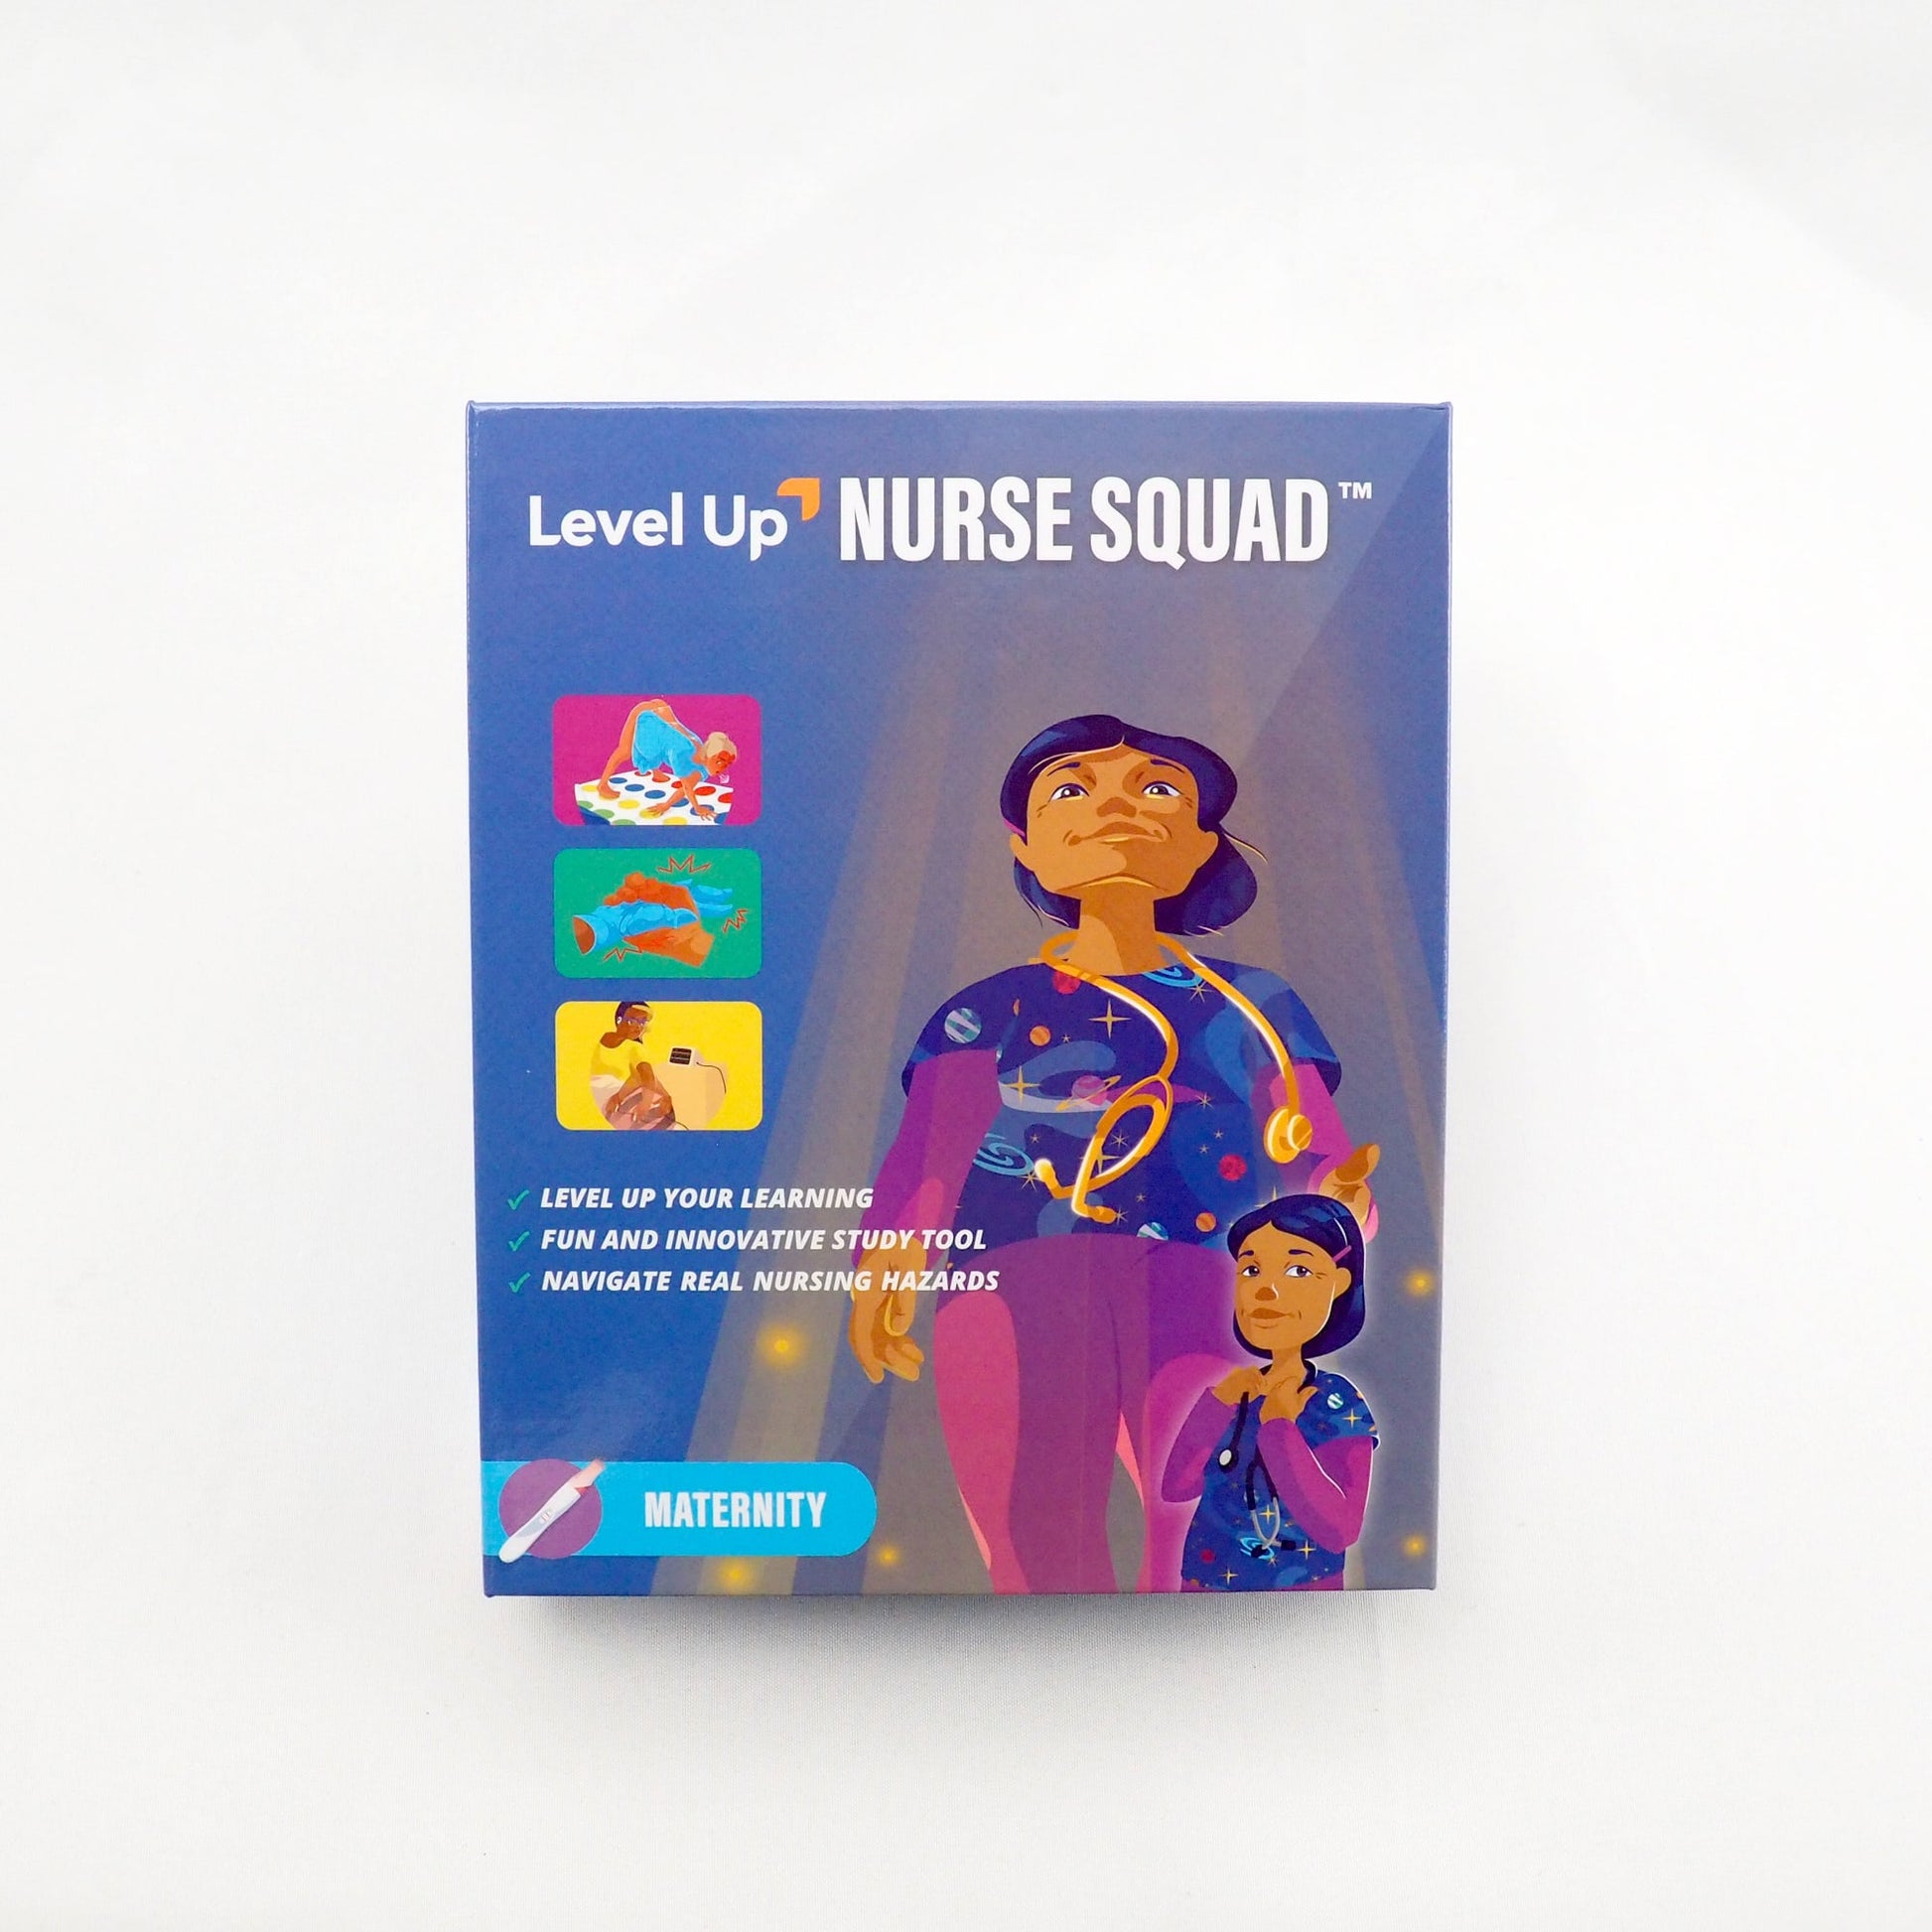 Level Up Nurse Squad - Maternity - Card Game from Level Up RN: Maternity-Front